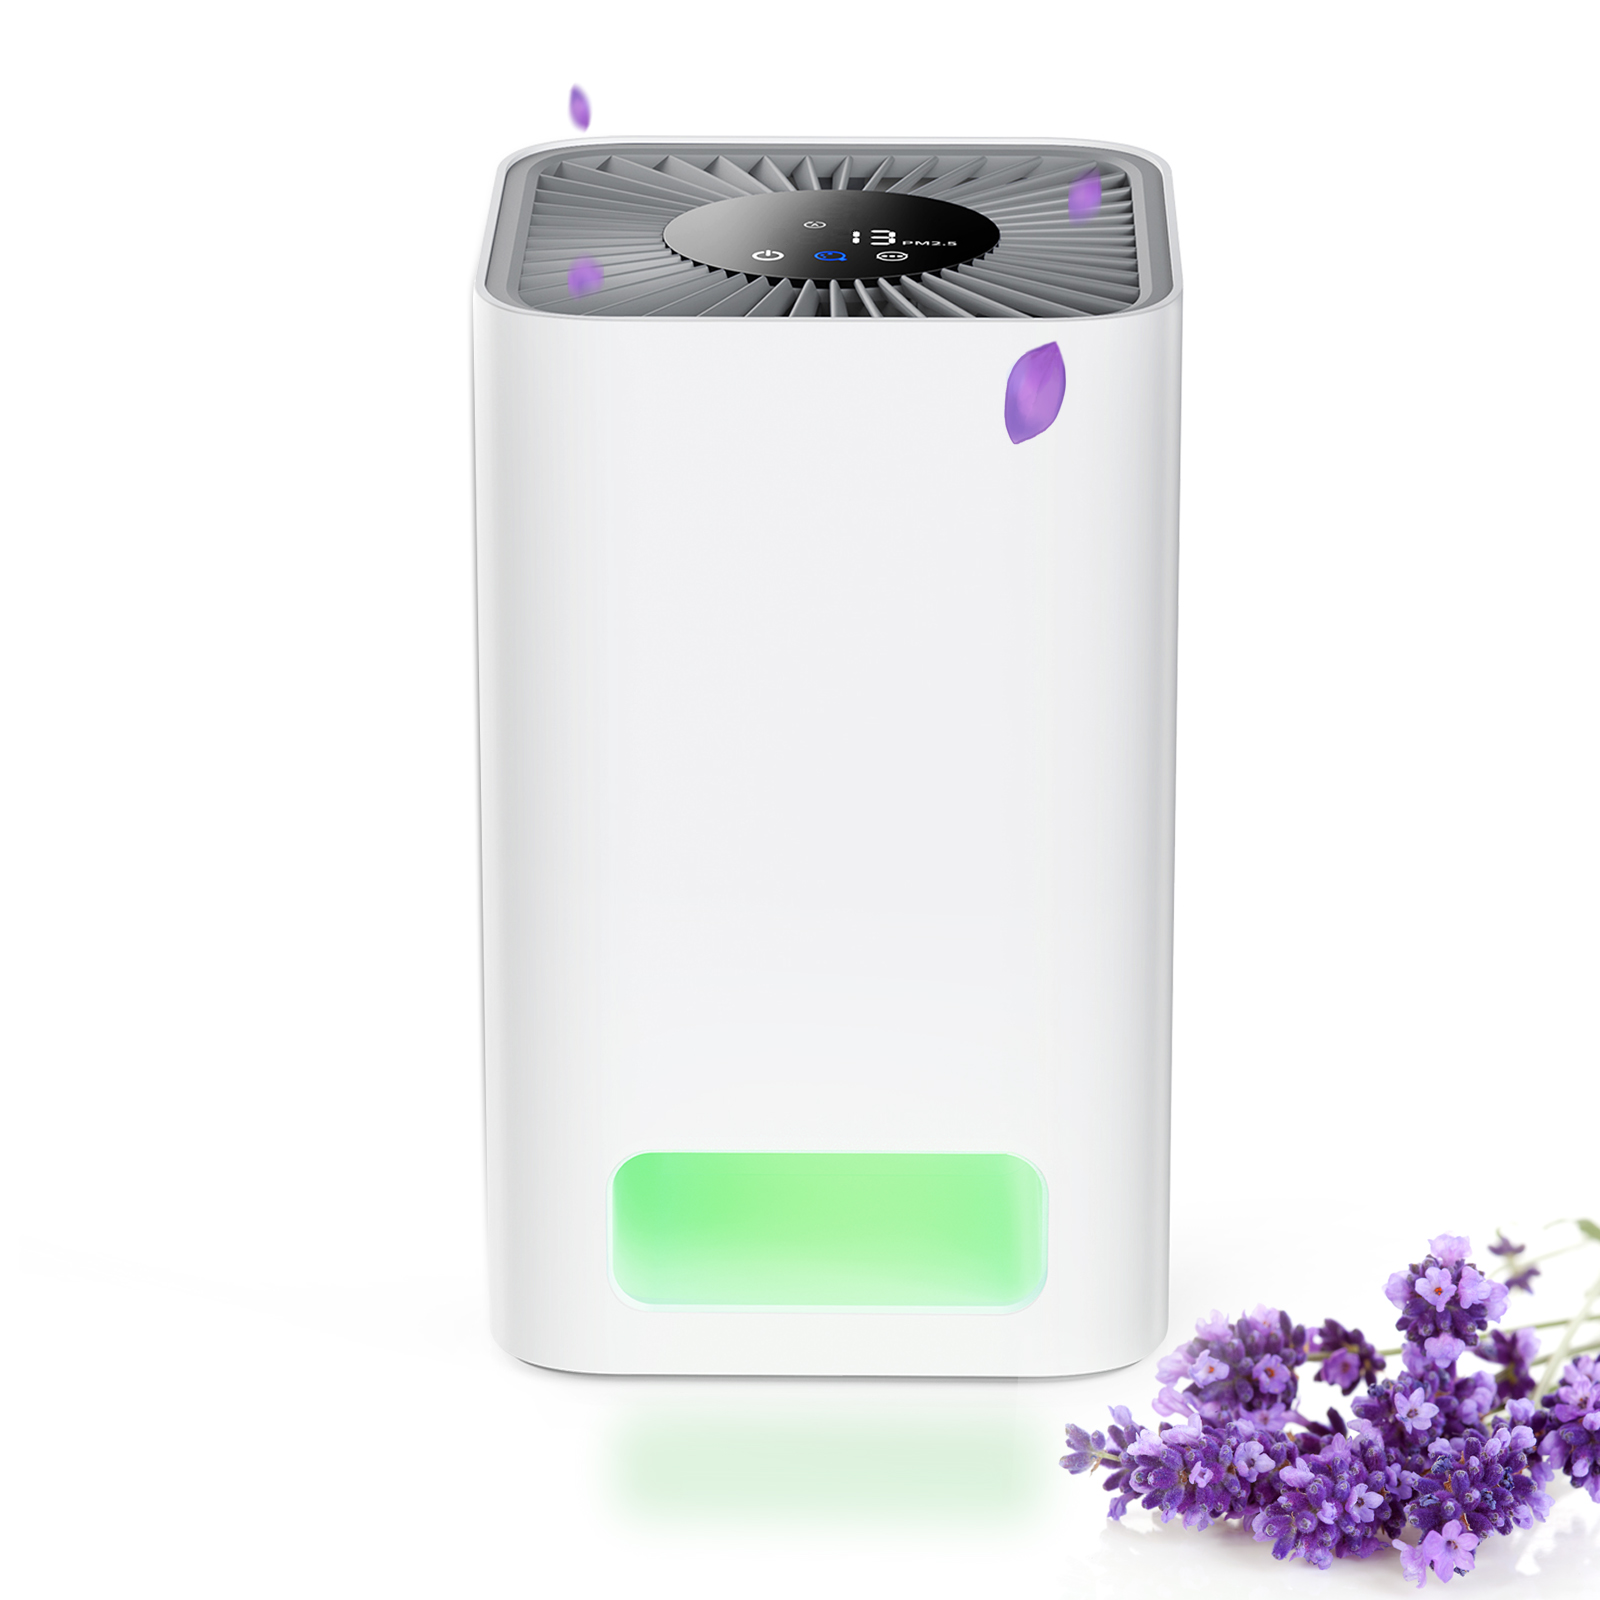 AM-160B UV Air Purifier with Multi Function Touch Control Panel and Air Quality Monitoring